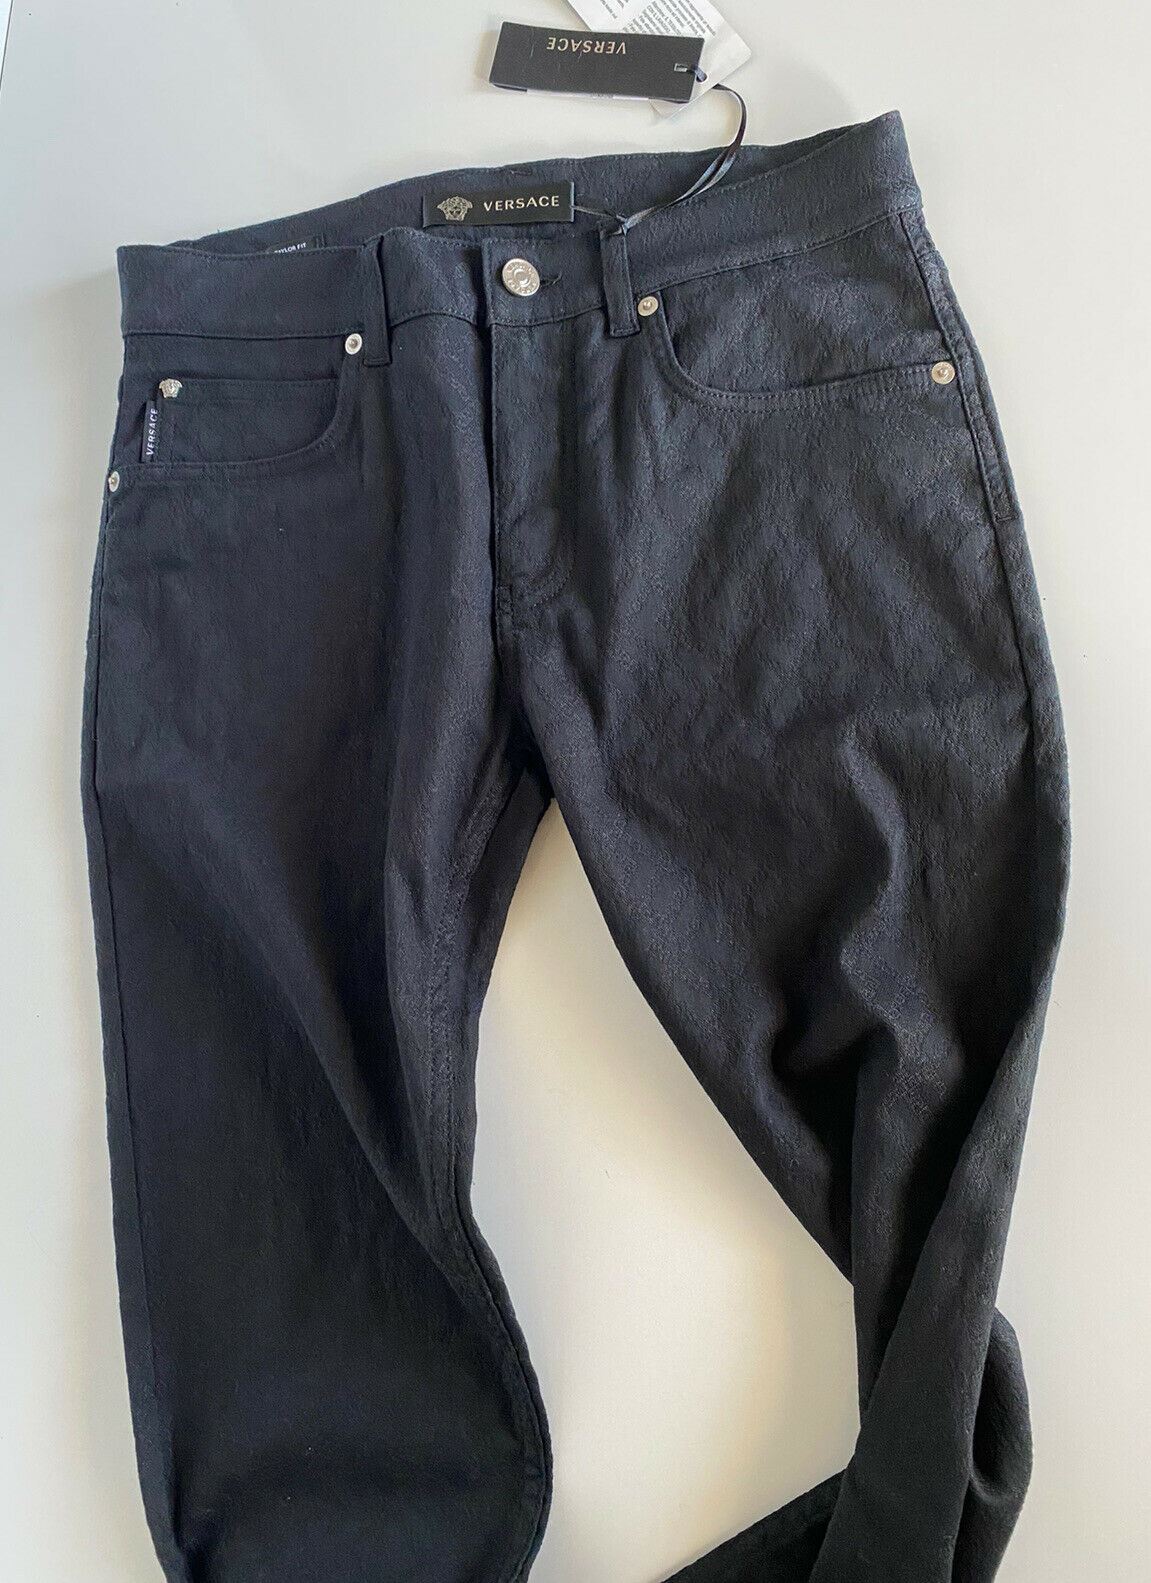 NWT $695 Versace Men's Denim Black Jeans Size 30 US A81832 Made in Italy